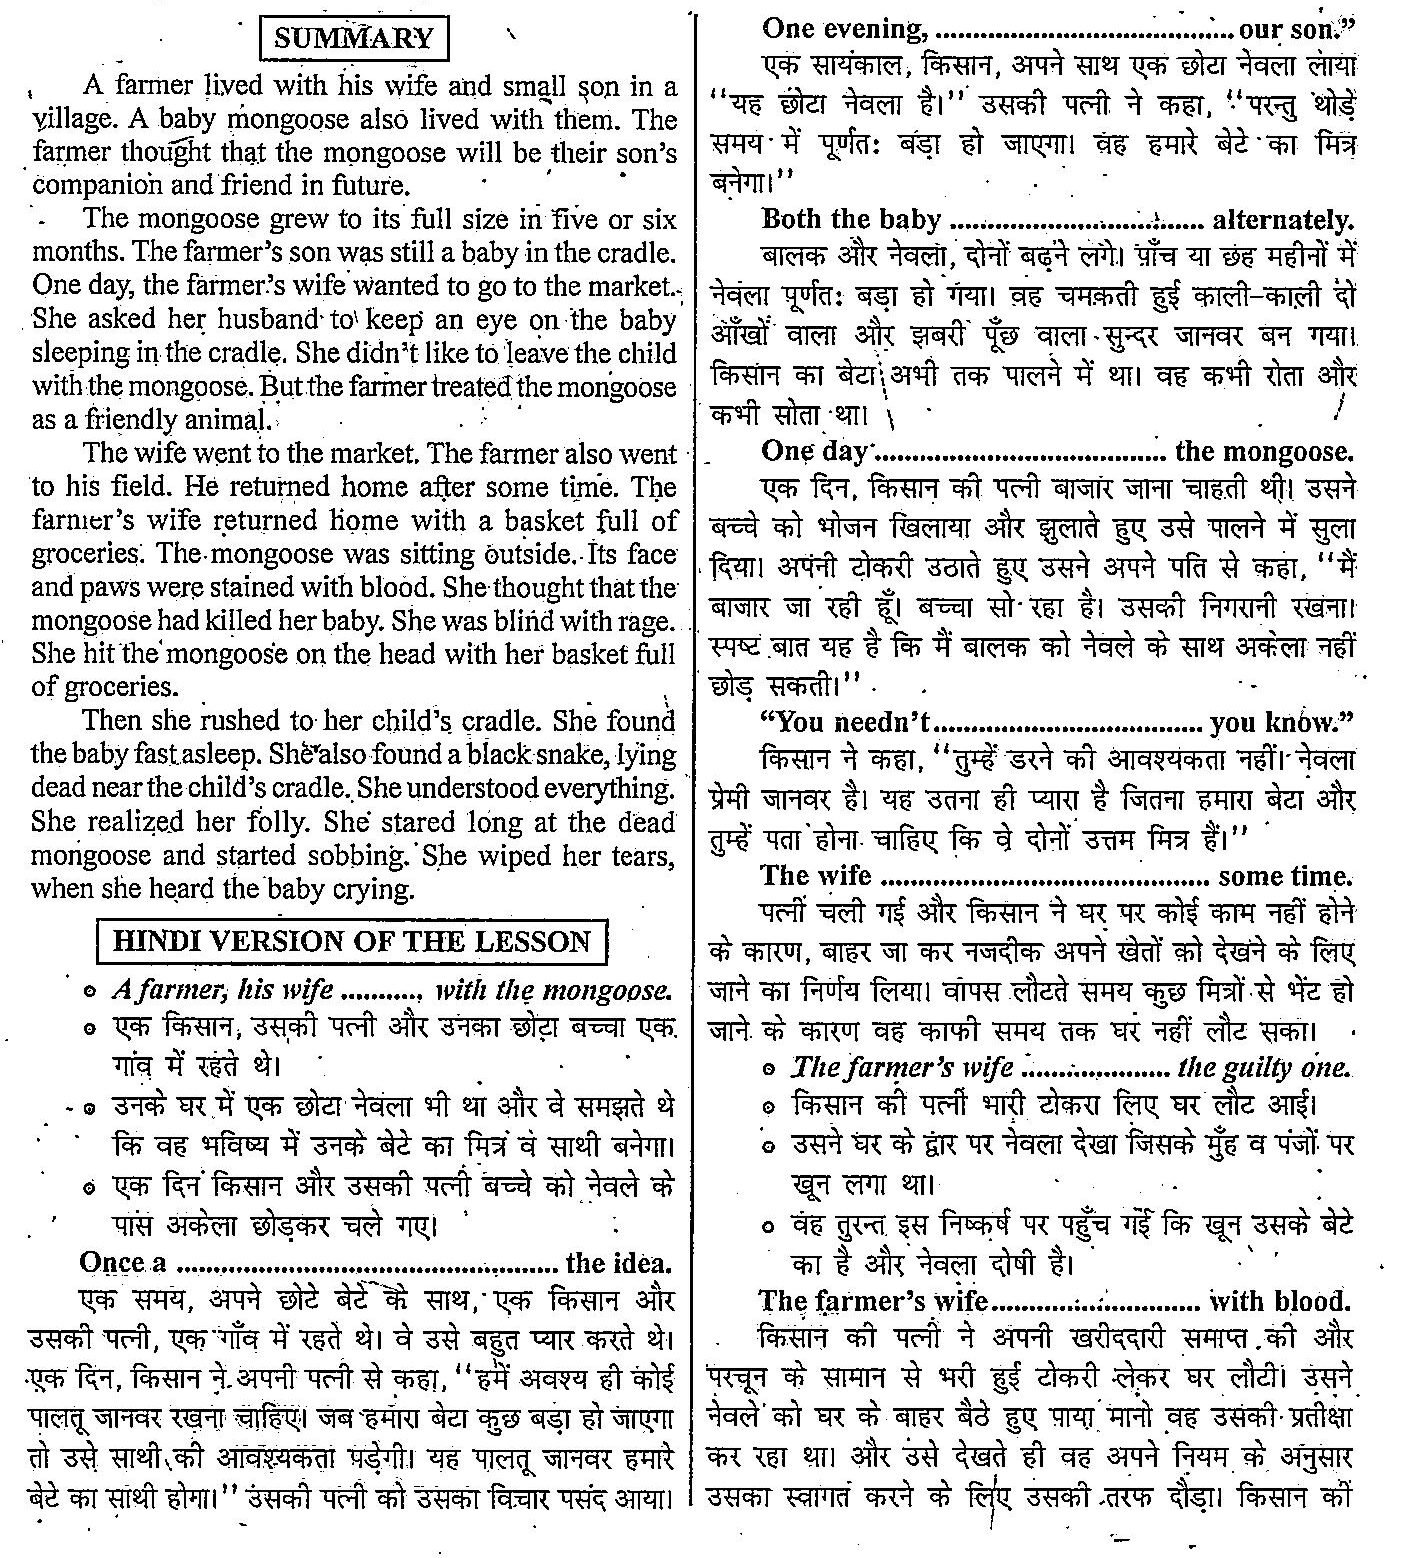 ncert-board-solution-6th-class-english-chapter-2-the-friendly-mongoose